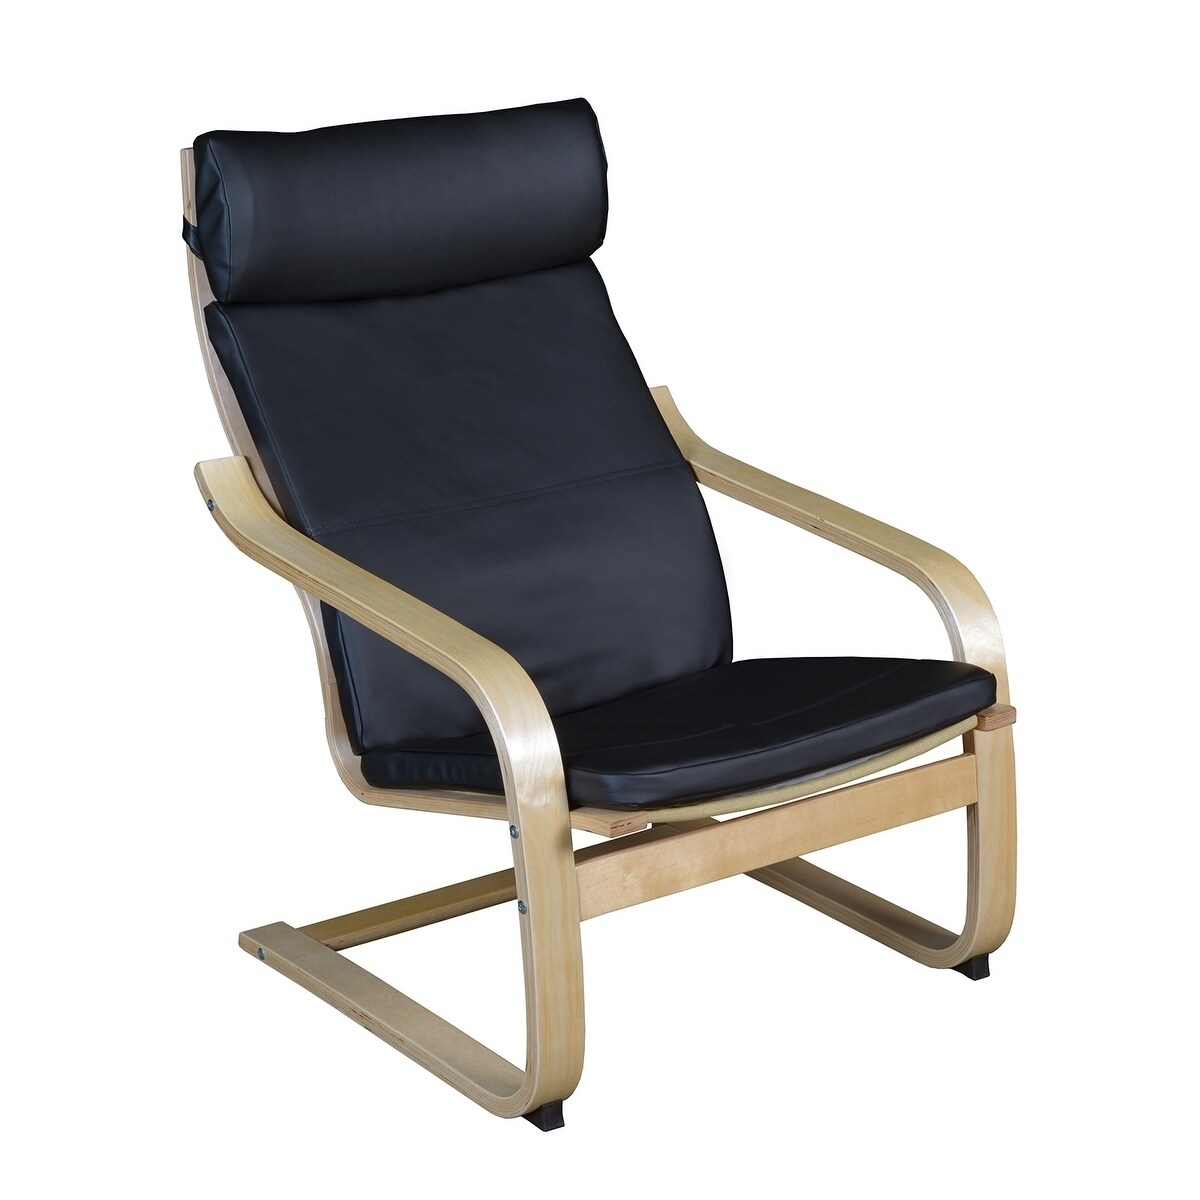 Shop Niche Mia Natural/ Black Leather Bentwood Reclining Chair - Free